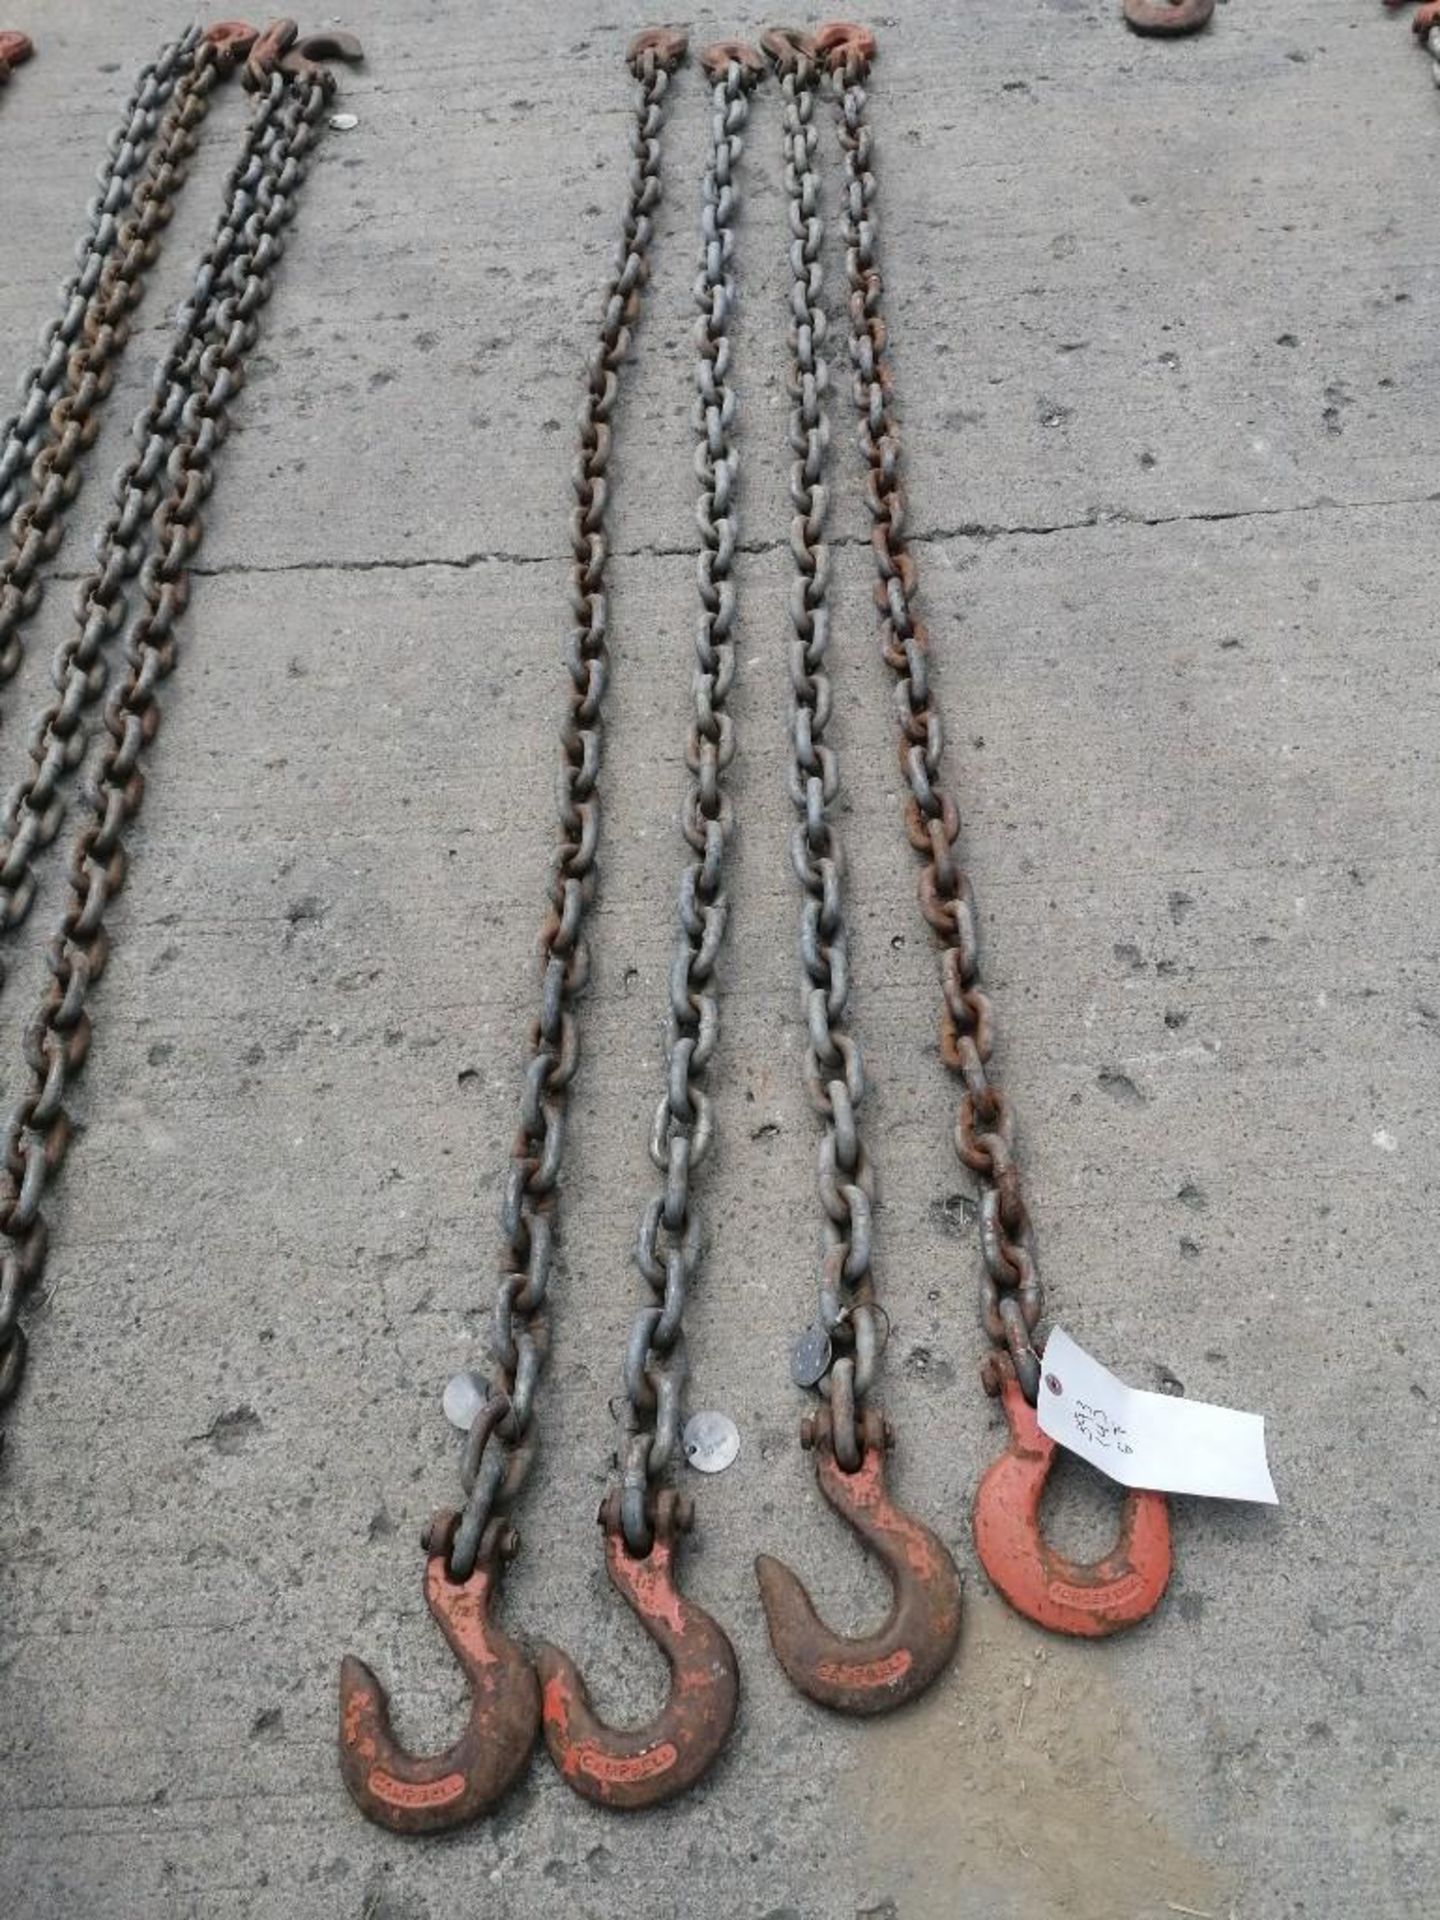 (4) 1/2" USA 6' Chain with hook. Located at 301 E Henry Street, Mt. Pleasant, IA 52641.